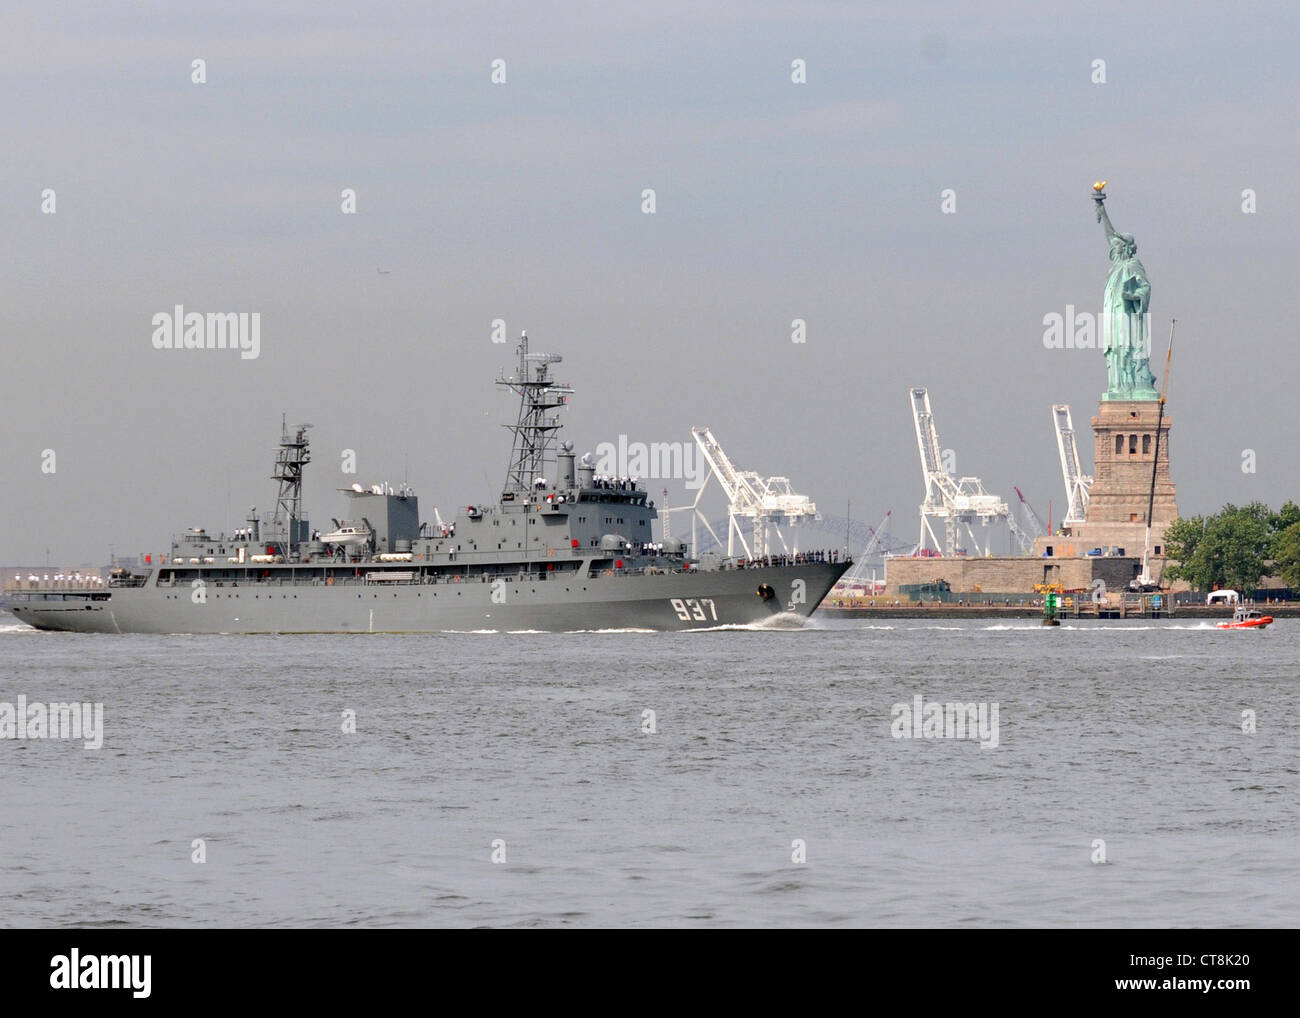 The Algerian navy ship Soummam (937) sails past the Statue of Liberty in New York Harbor, marking the first time an Algerian navy ship has visited the United States. During their visit, the Algerian crew will tour the city and conduct office calls with city and government officials. The Soummam transited the Atlantic from Algeria as part of a training mission for Algerian naval academy students. Stock Photo